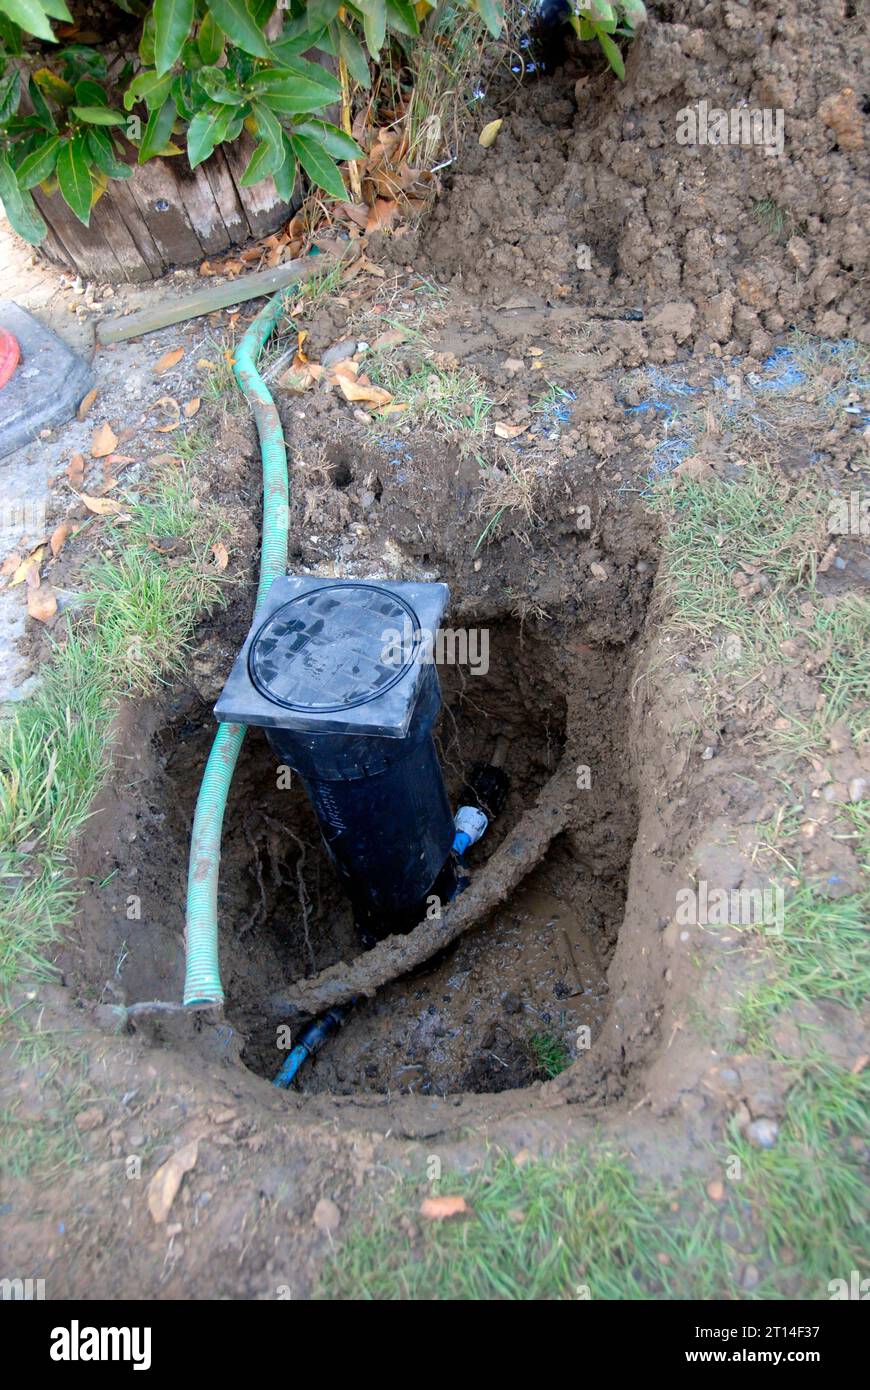 Hole dug in grass area to replace leaking water meter, with other service pipes exposed Stock Photo